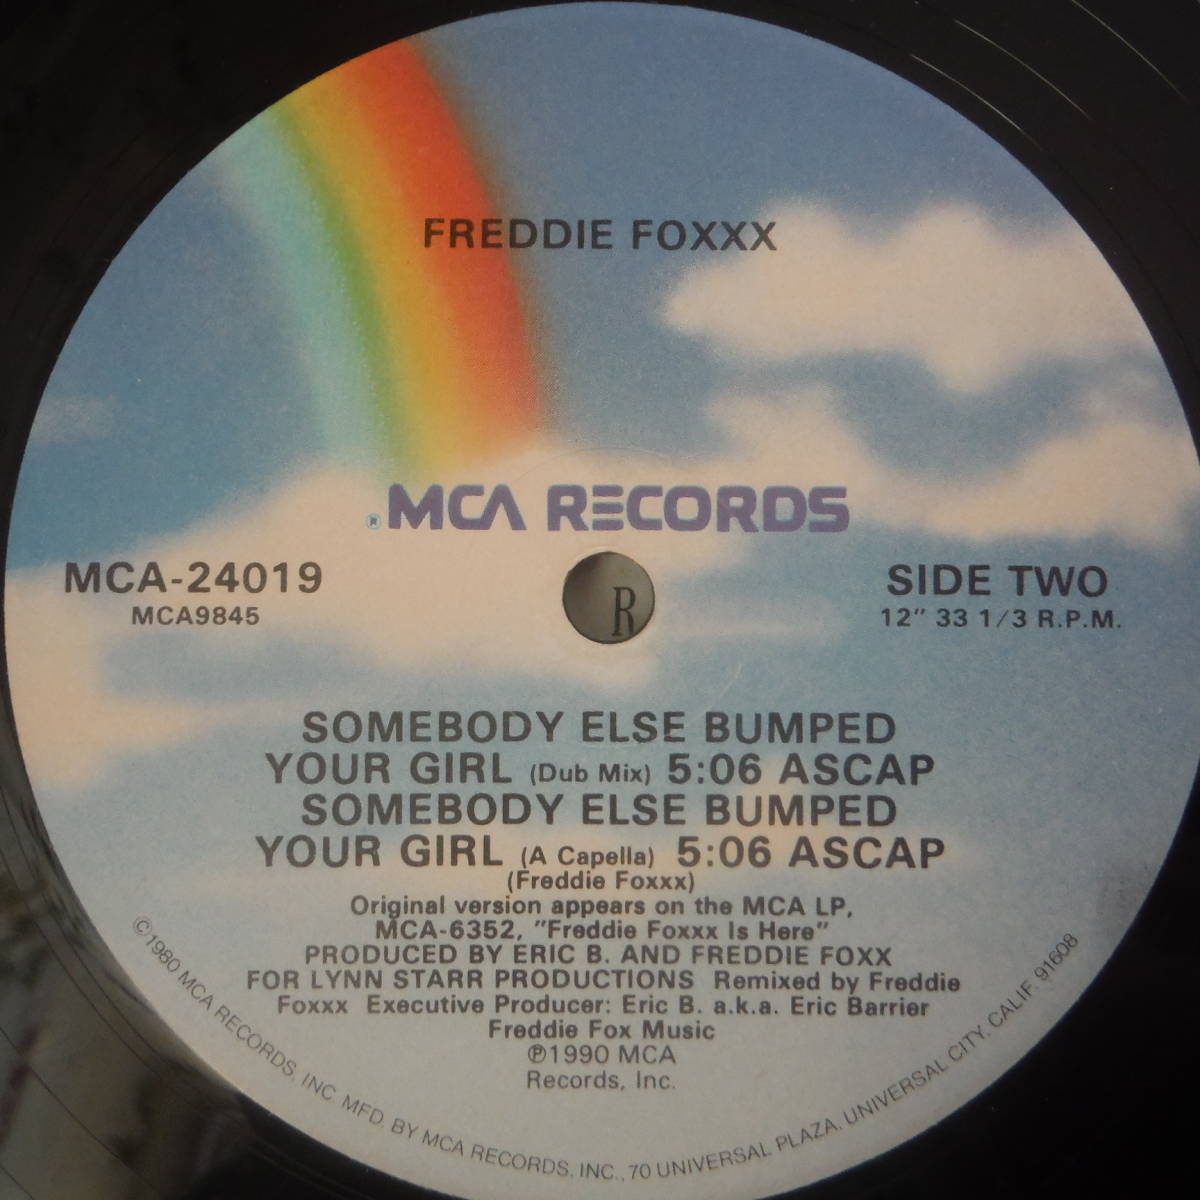 Freddie Foxxx / Somebody Else Bumped Your Girl 12"Remix 12インチ　ヒップホップ HIPHOP 激レア_画像4